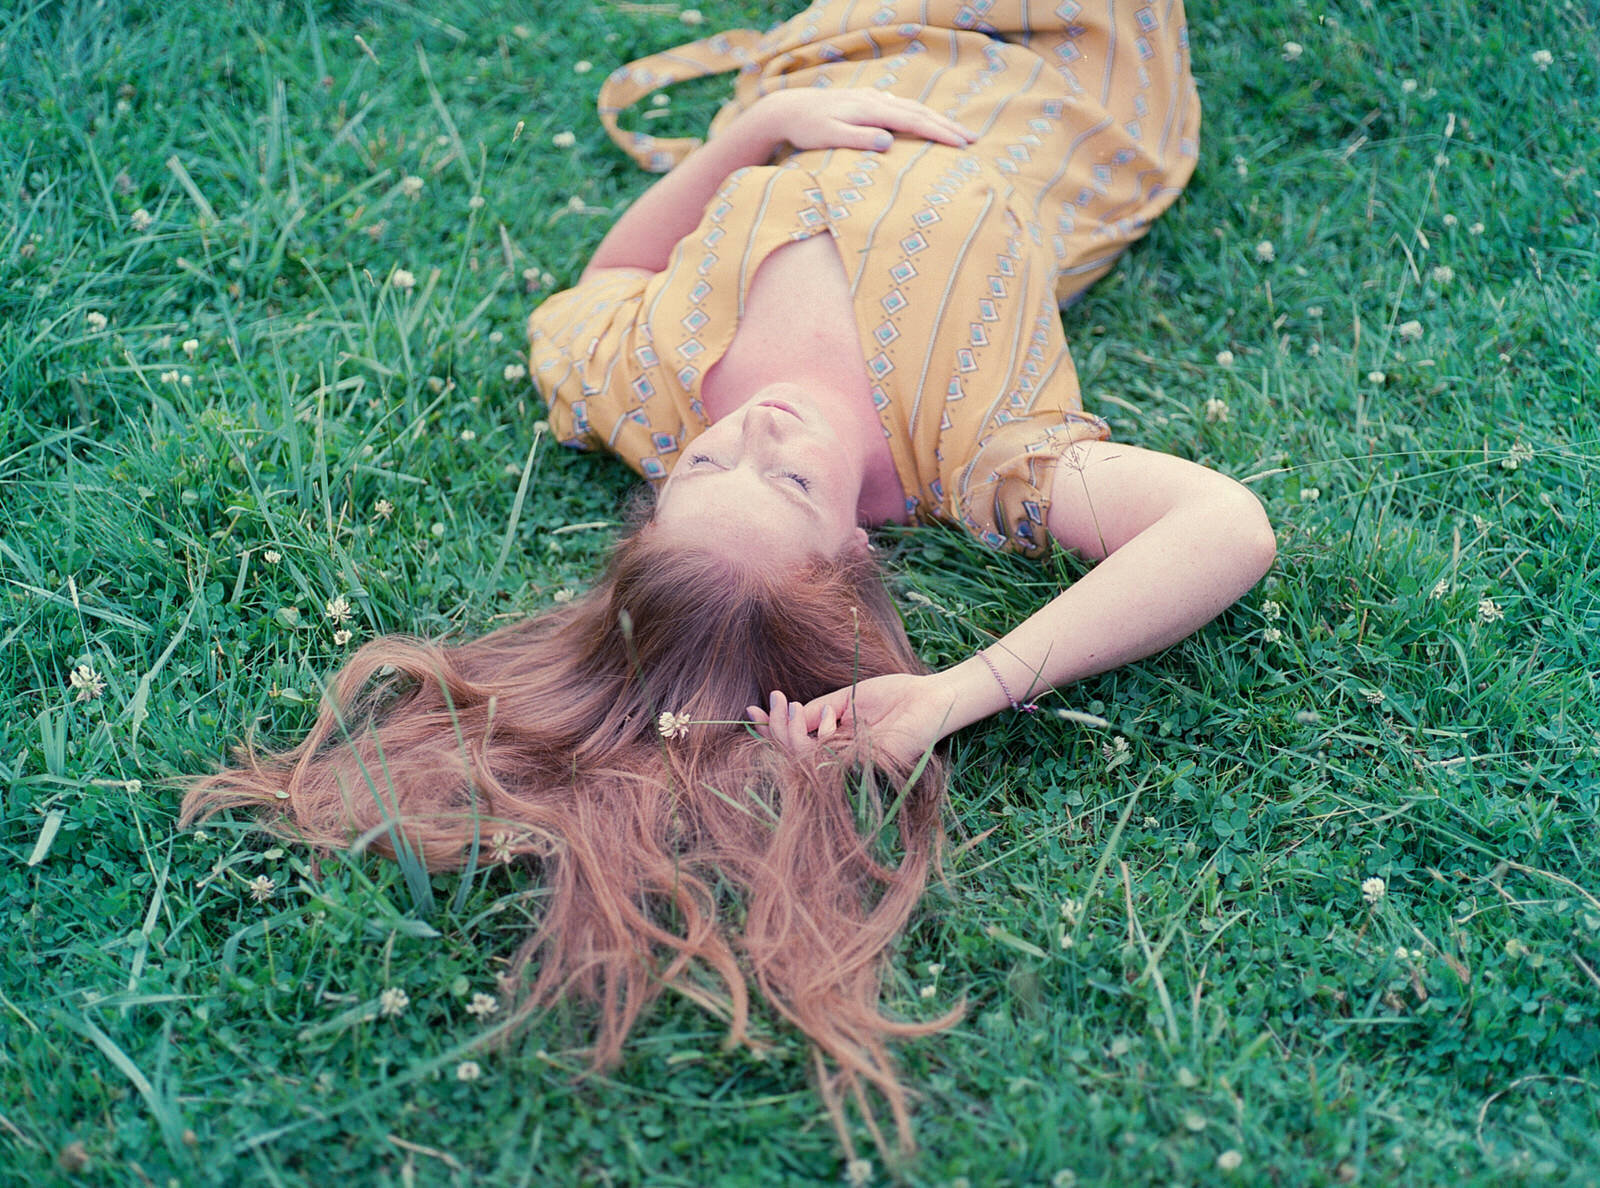 Her hair and that green grass were a perfect combination!